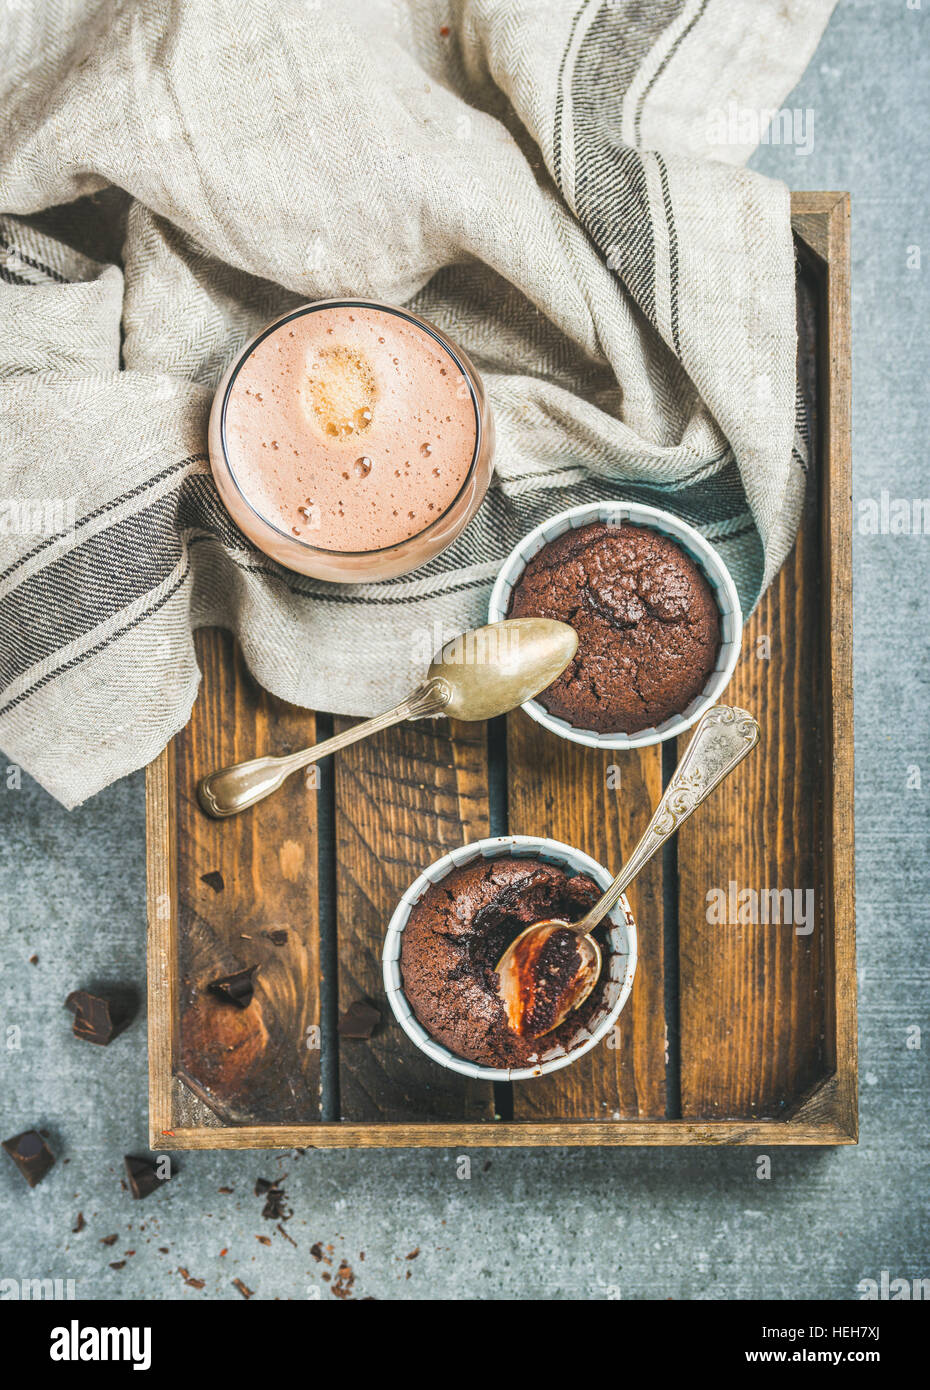 Chocolate souffle in blue individual baking cups and chocolate mocha coffee in wooden serving tray over grey concrete background, top view Stock Photo